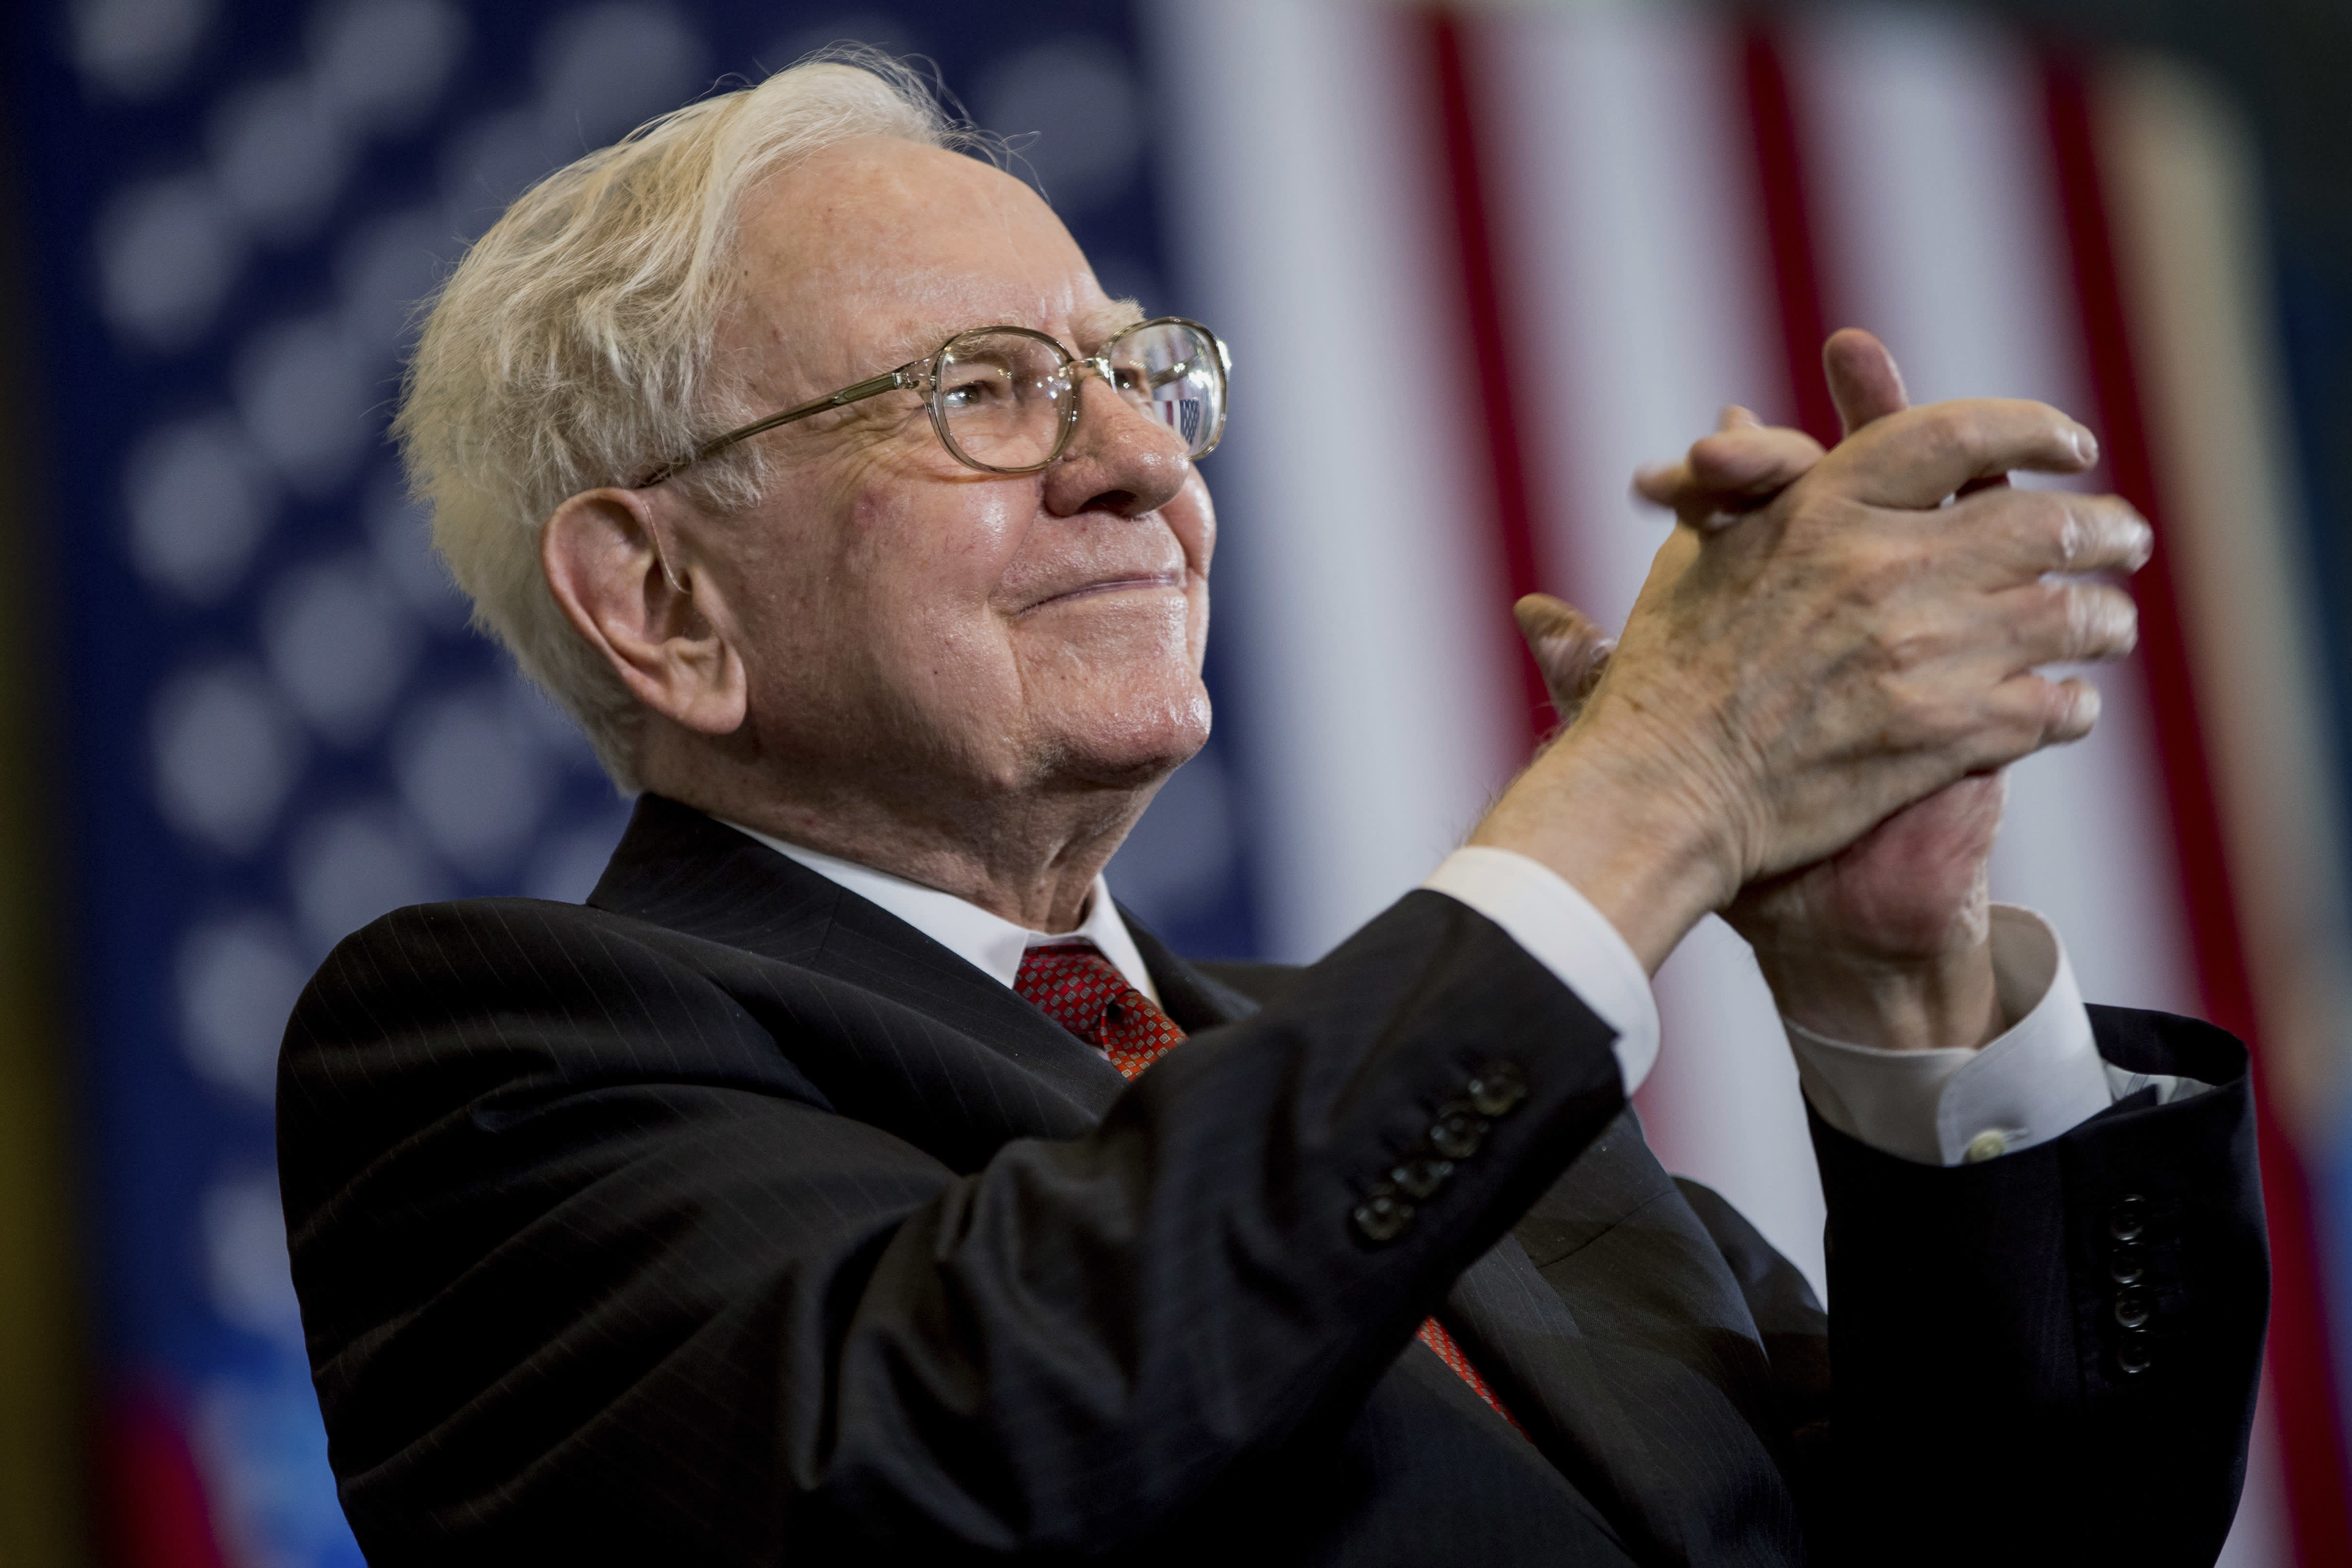 Warren Buffett's first big semiconductor investment in his career is also a bet on Apple's future